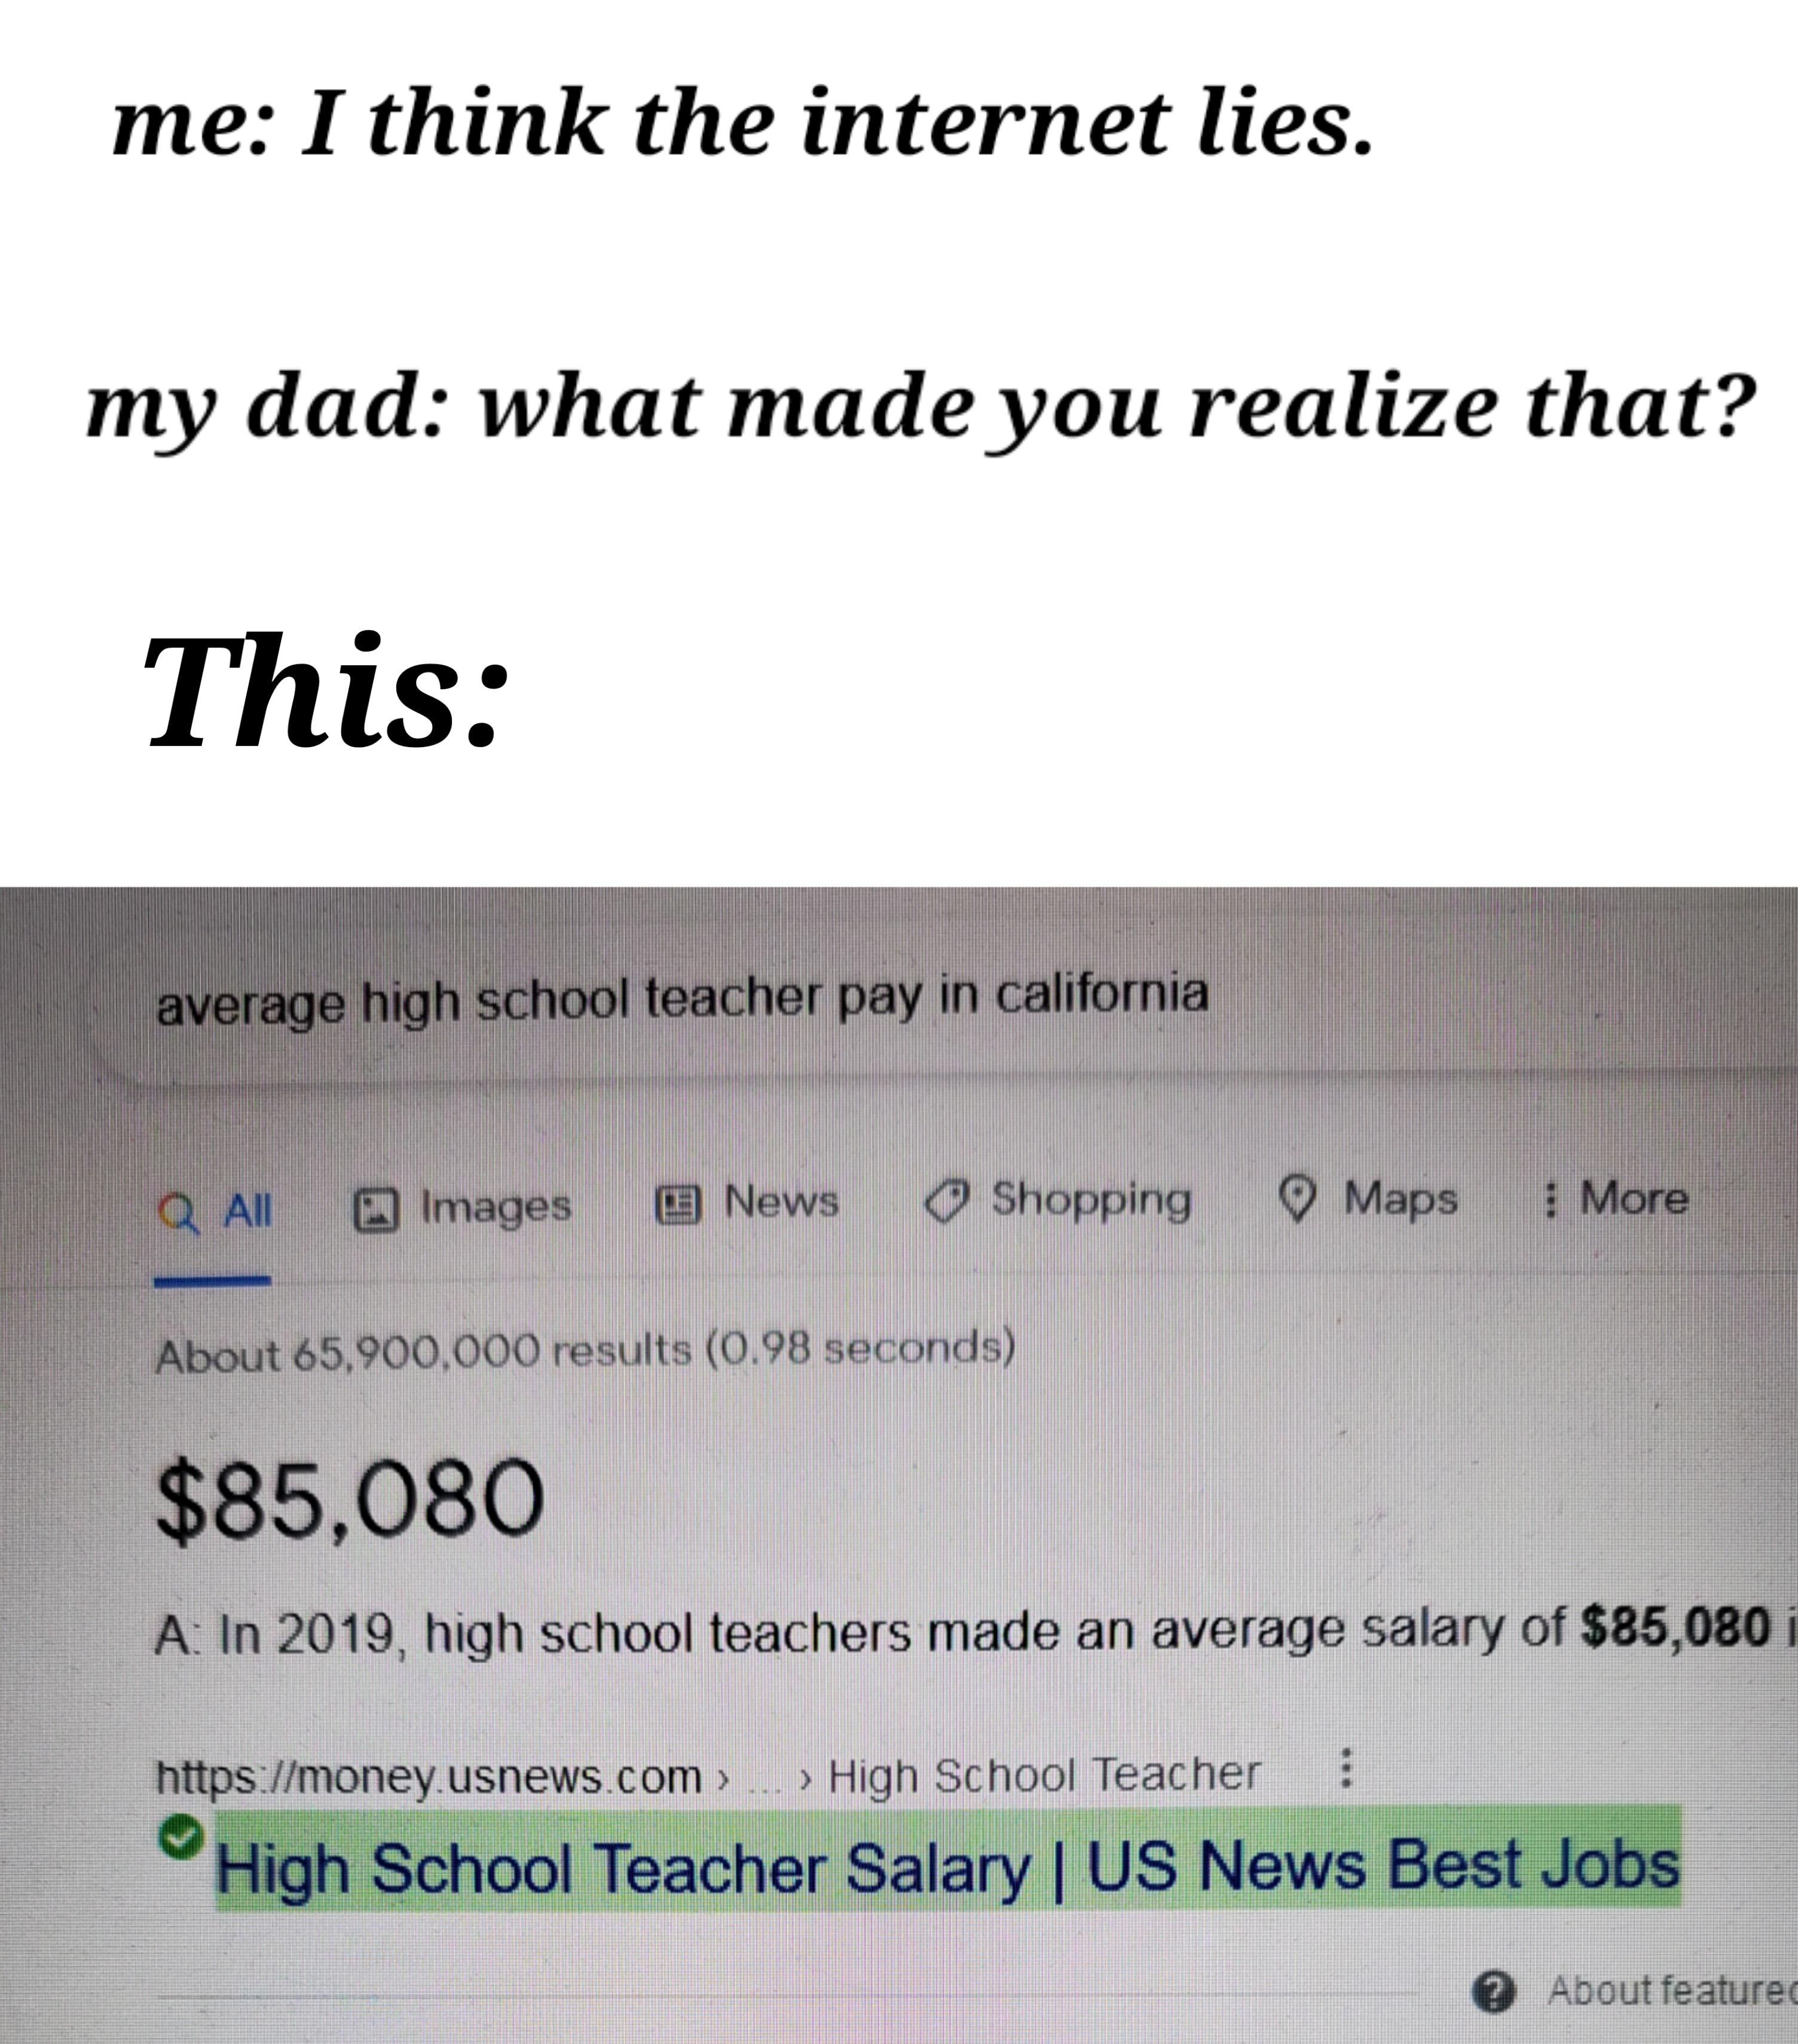 document - me I think the internet lies. my dad what made you realize that? This average high school teacher pay in california Qa Images C News Shopping Maps More About 65,900,000 results 0.98 seconds $85,080 A In 2019, high school teachers made an averag